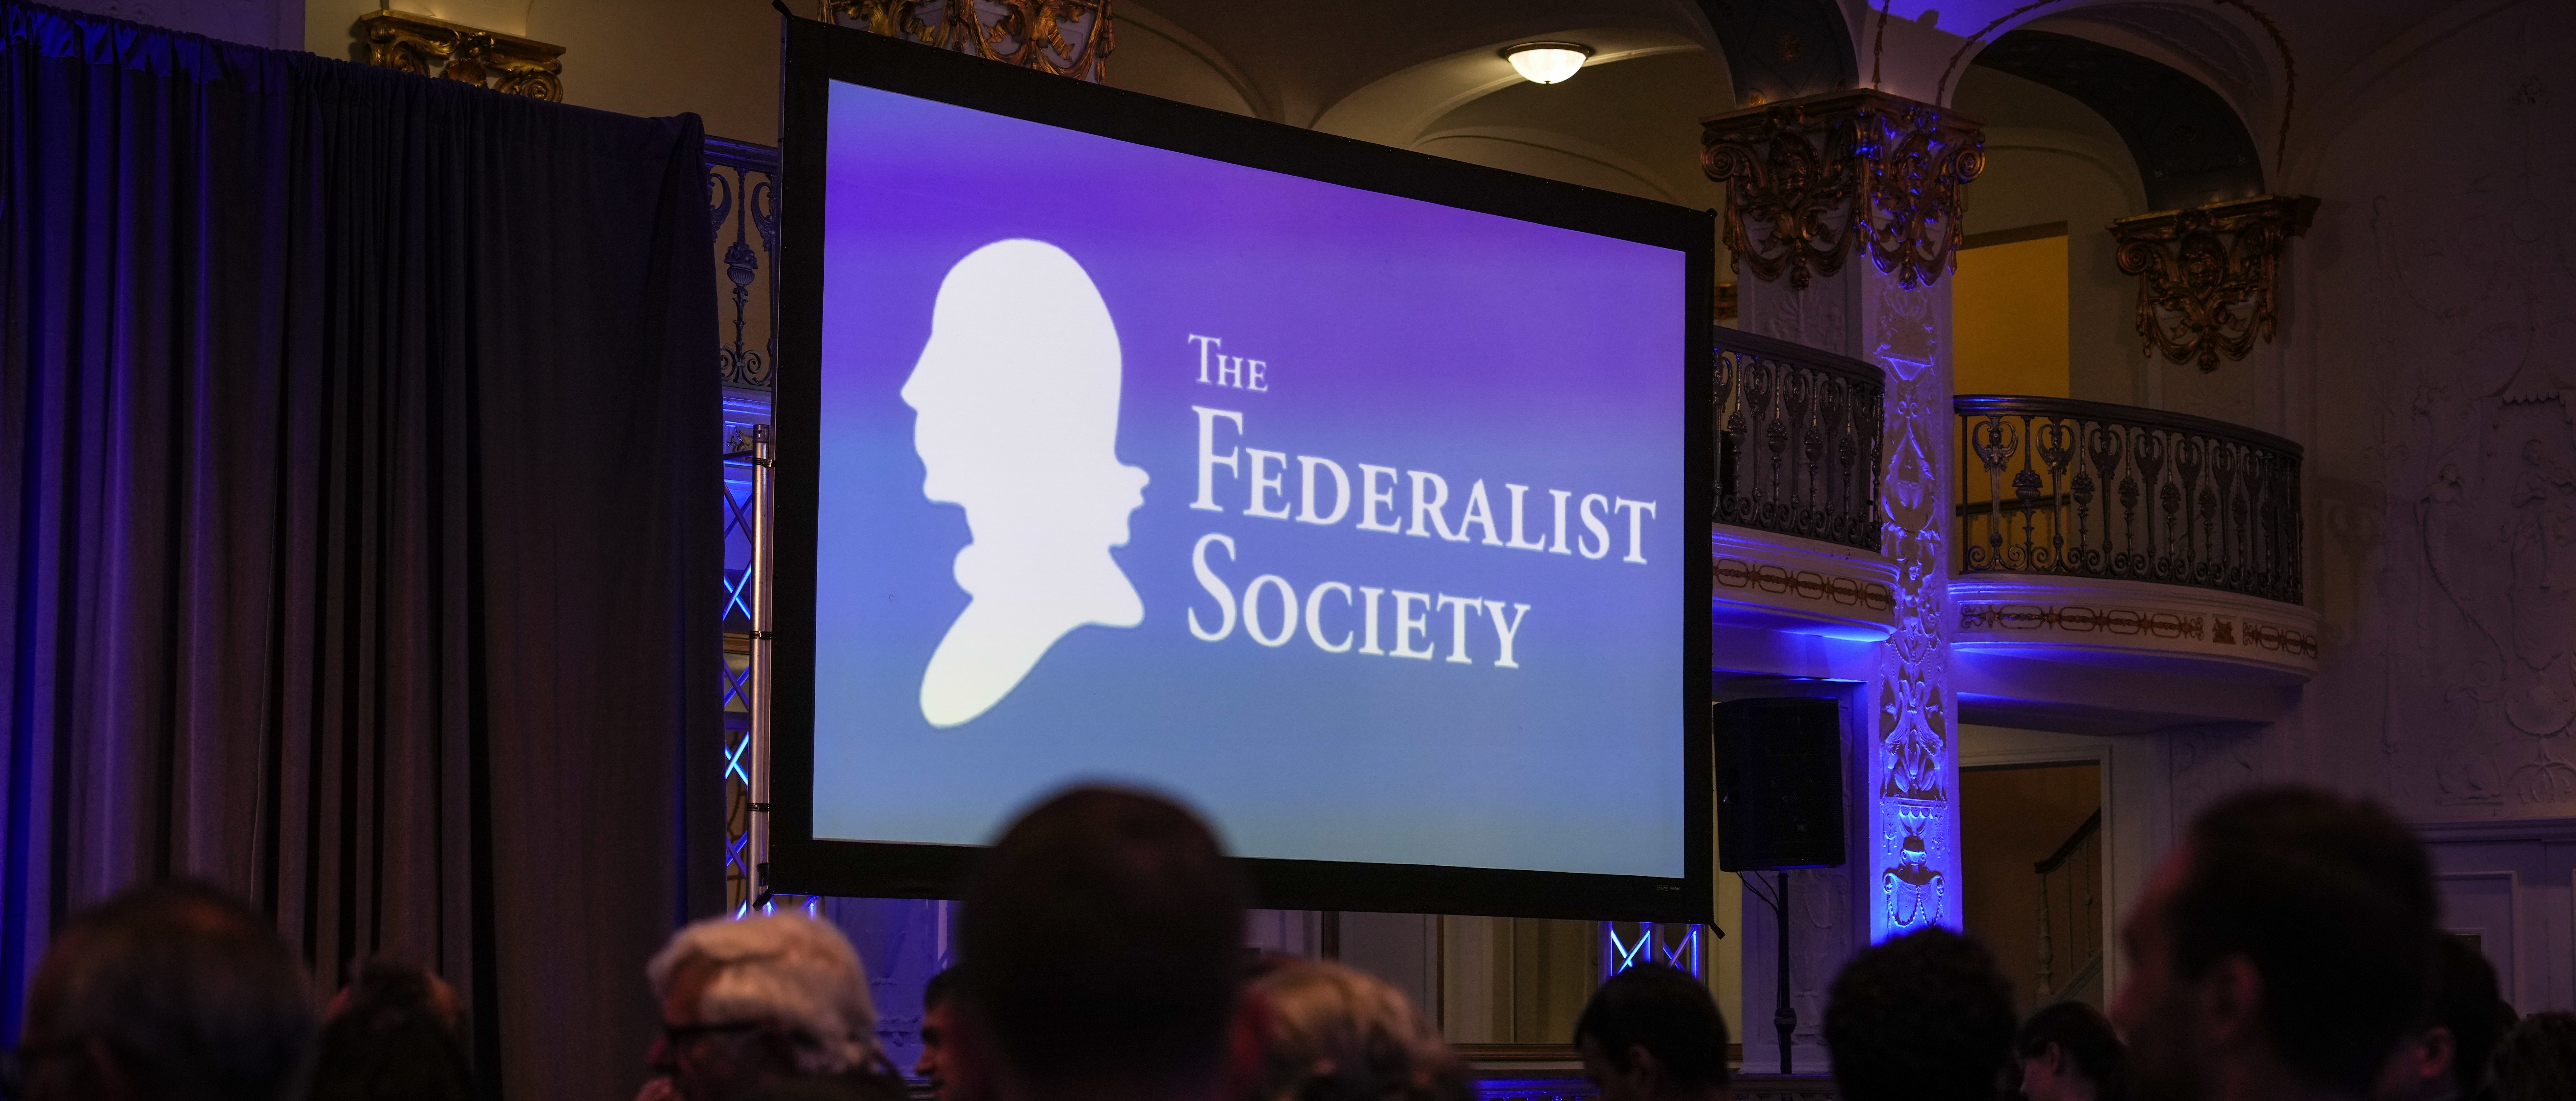 Former Vice President Mike Pence Addresses Federalist Society Event In Washington, D.C.